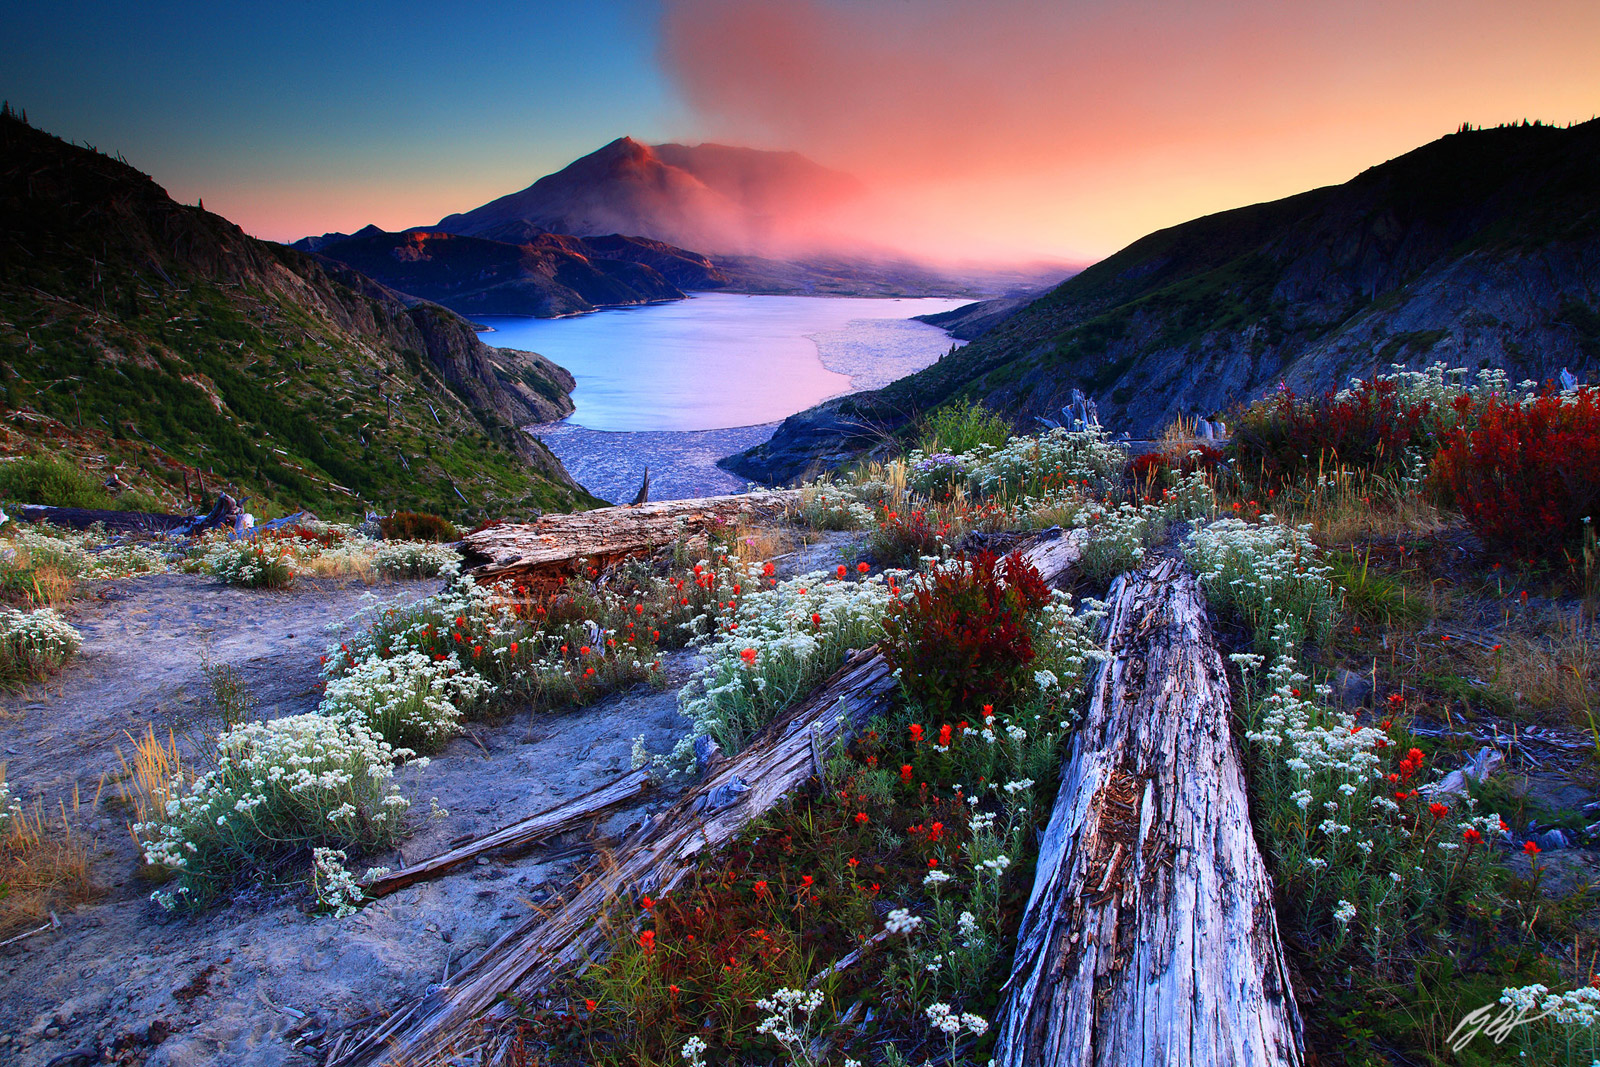 Sunset Wildflowers and Mt St Helens from Norway Pass, Mt St Helens National Volcanic Monument, Washington